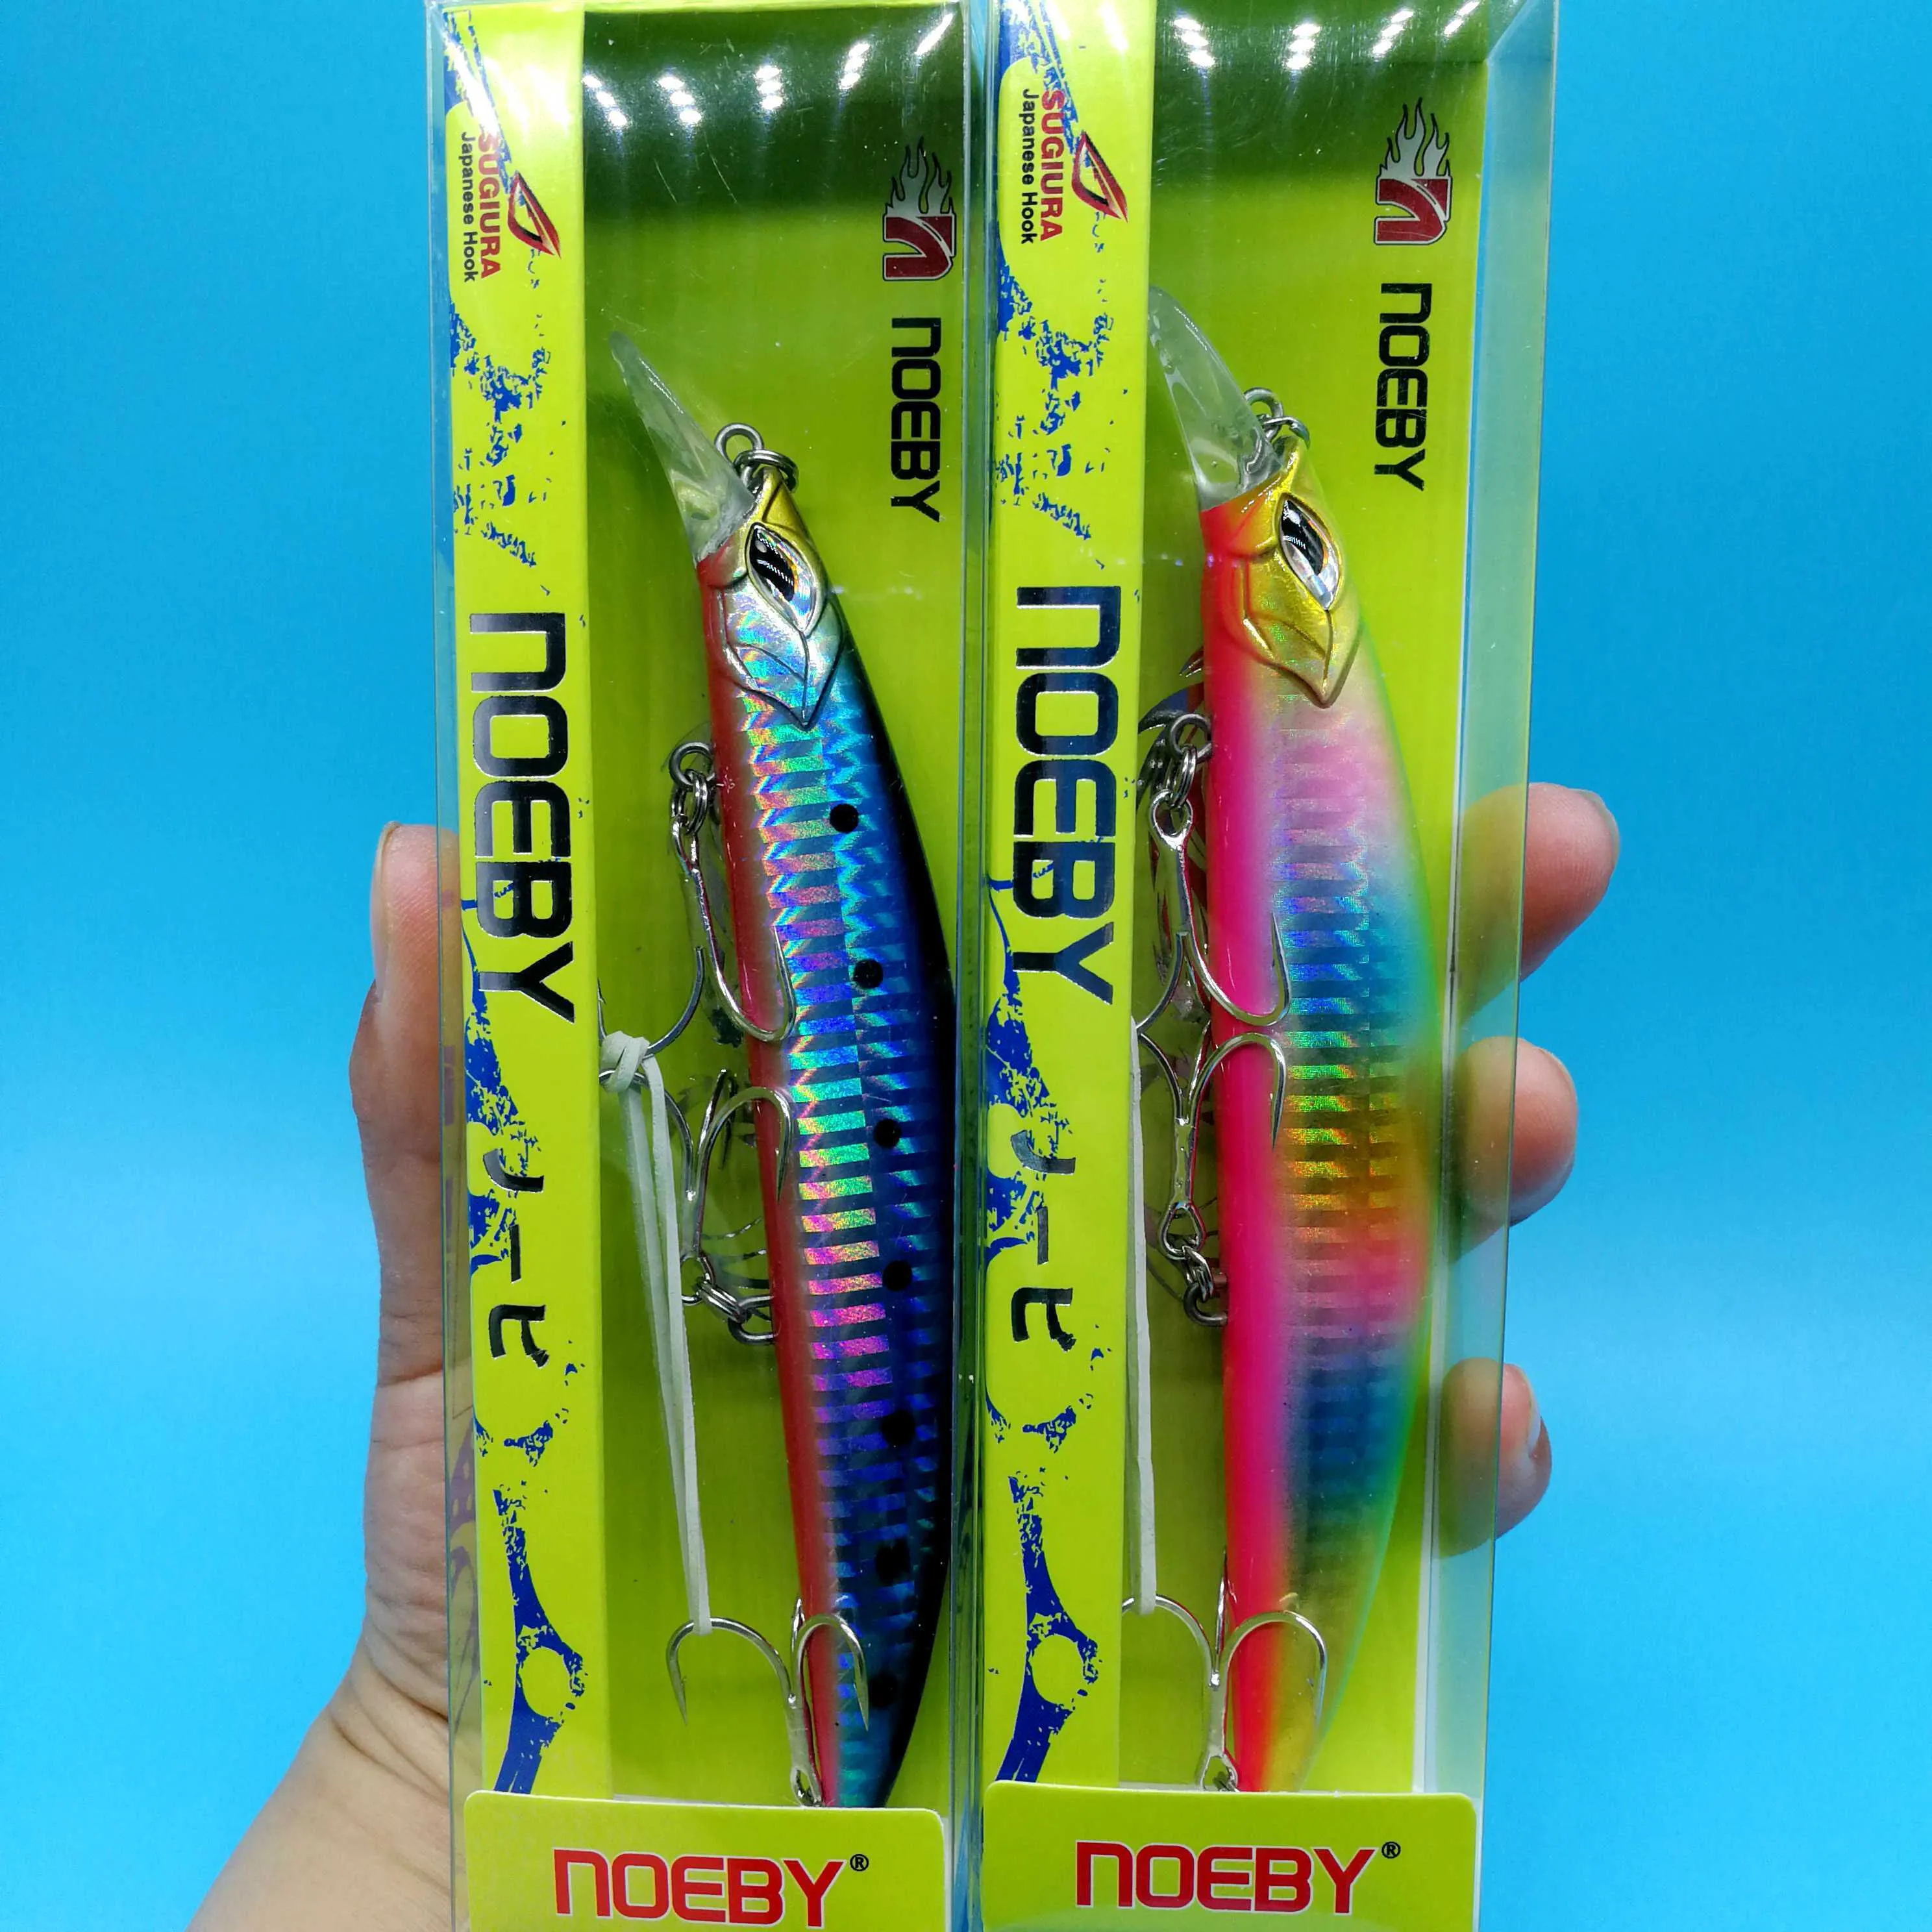 NOEBY 2019 Floating Minnow Rainbow Trout Lures Set 23g, 130mm, 0 1.5m  Depth, Wobbler Hard Bait For Saltwater Fishing Tackle T20328l From Wsxedcq,  $22.5